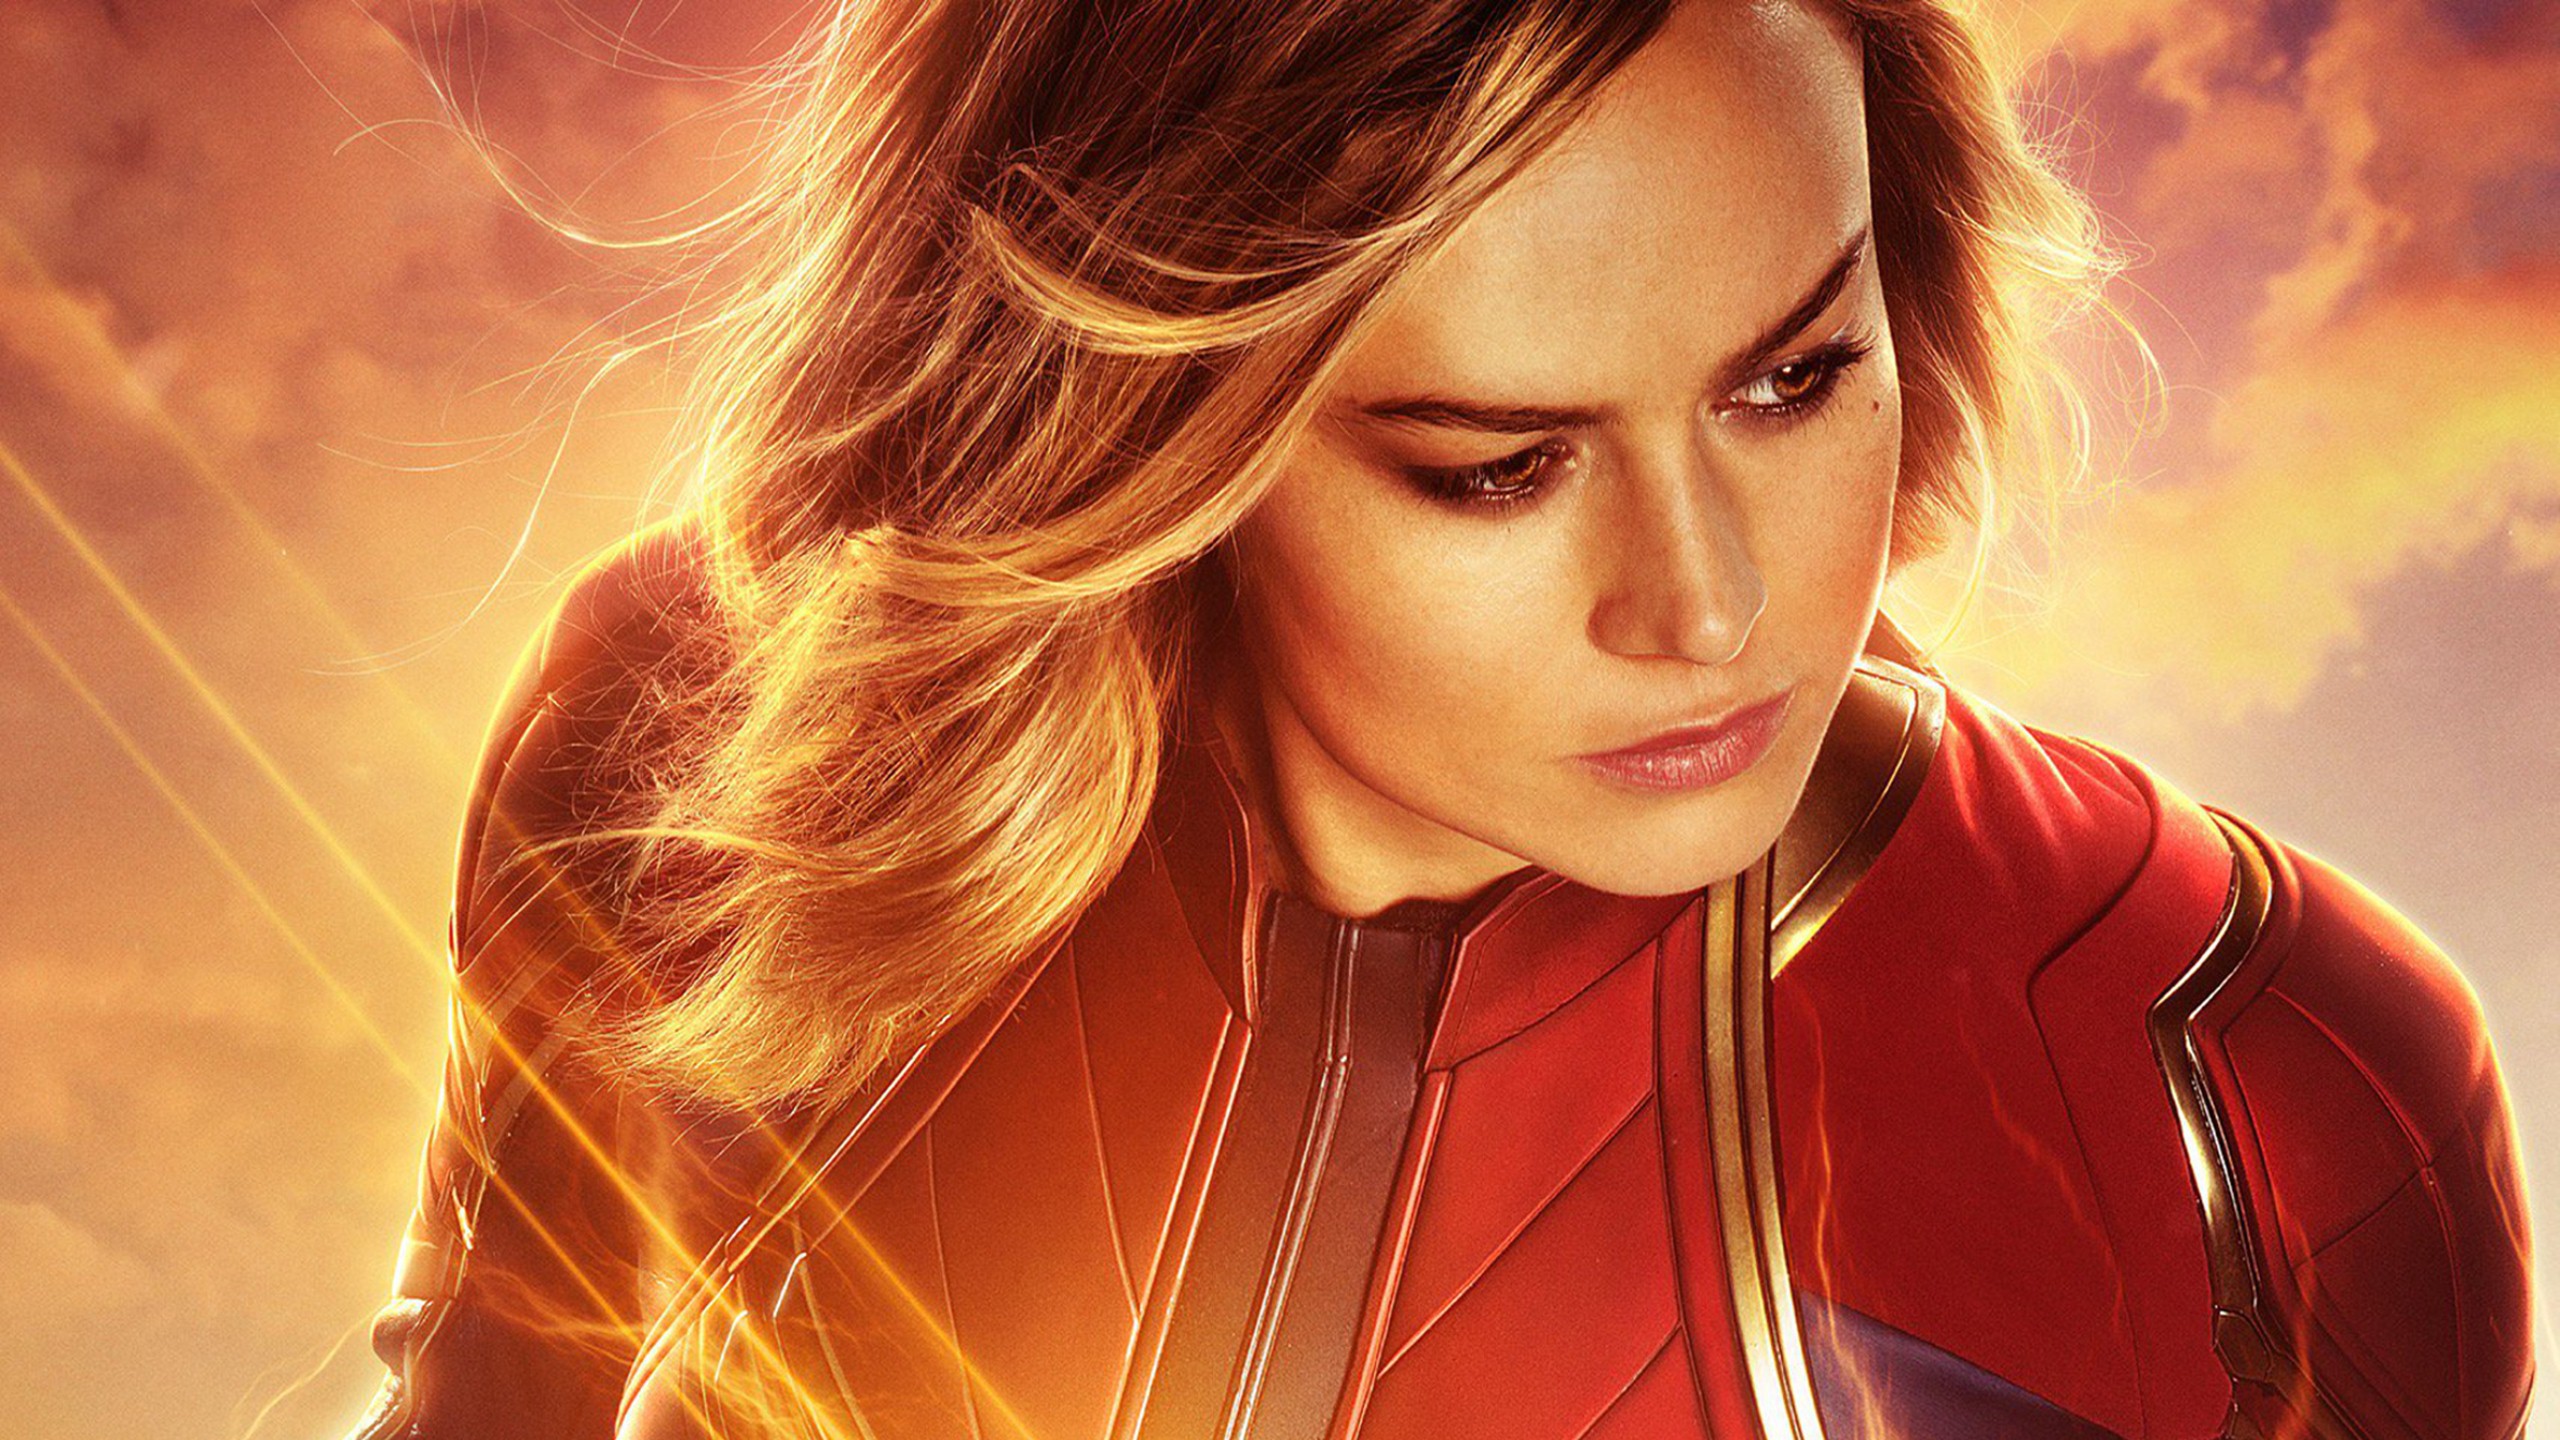 Actress Brie Larson In Captain Marvel Movie HD Wallpaper